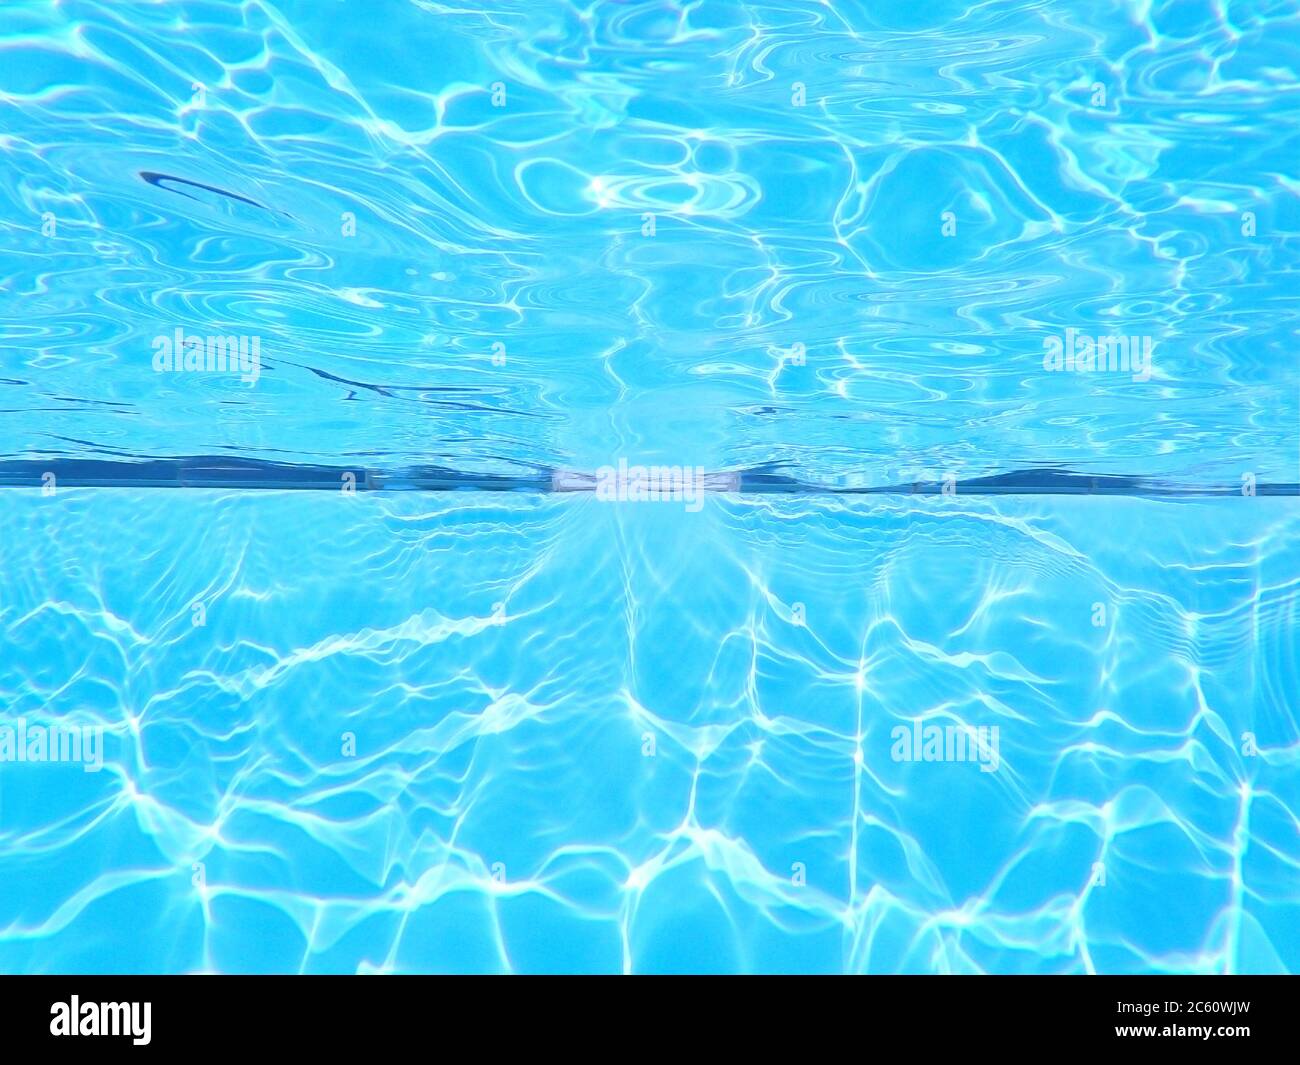 Swimming pool underwater background. Chlorine water treatment and  sanitation. Empty copy space with no people for Editor's text. Stock Photo